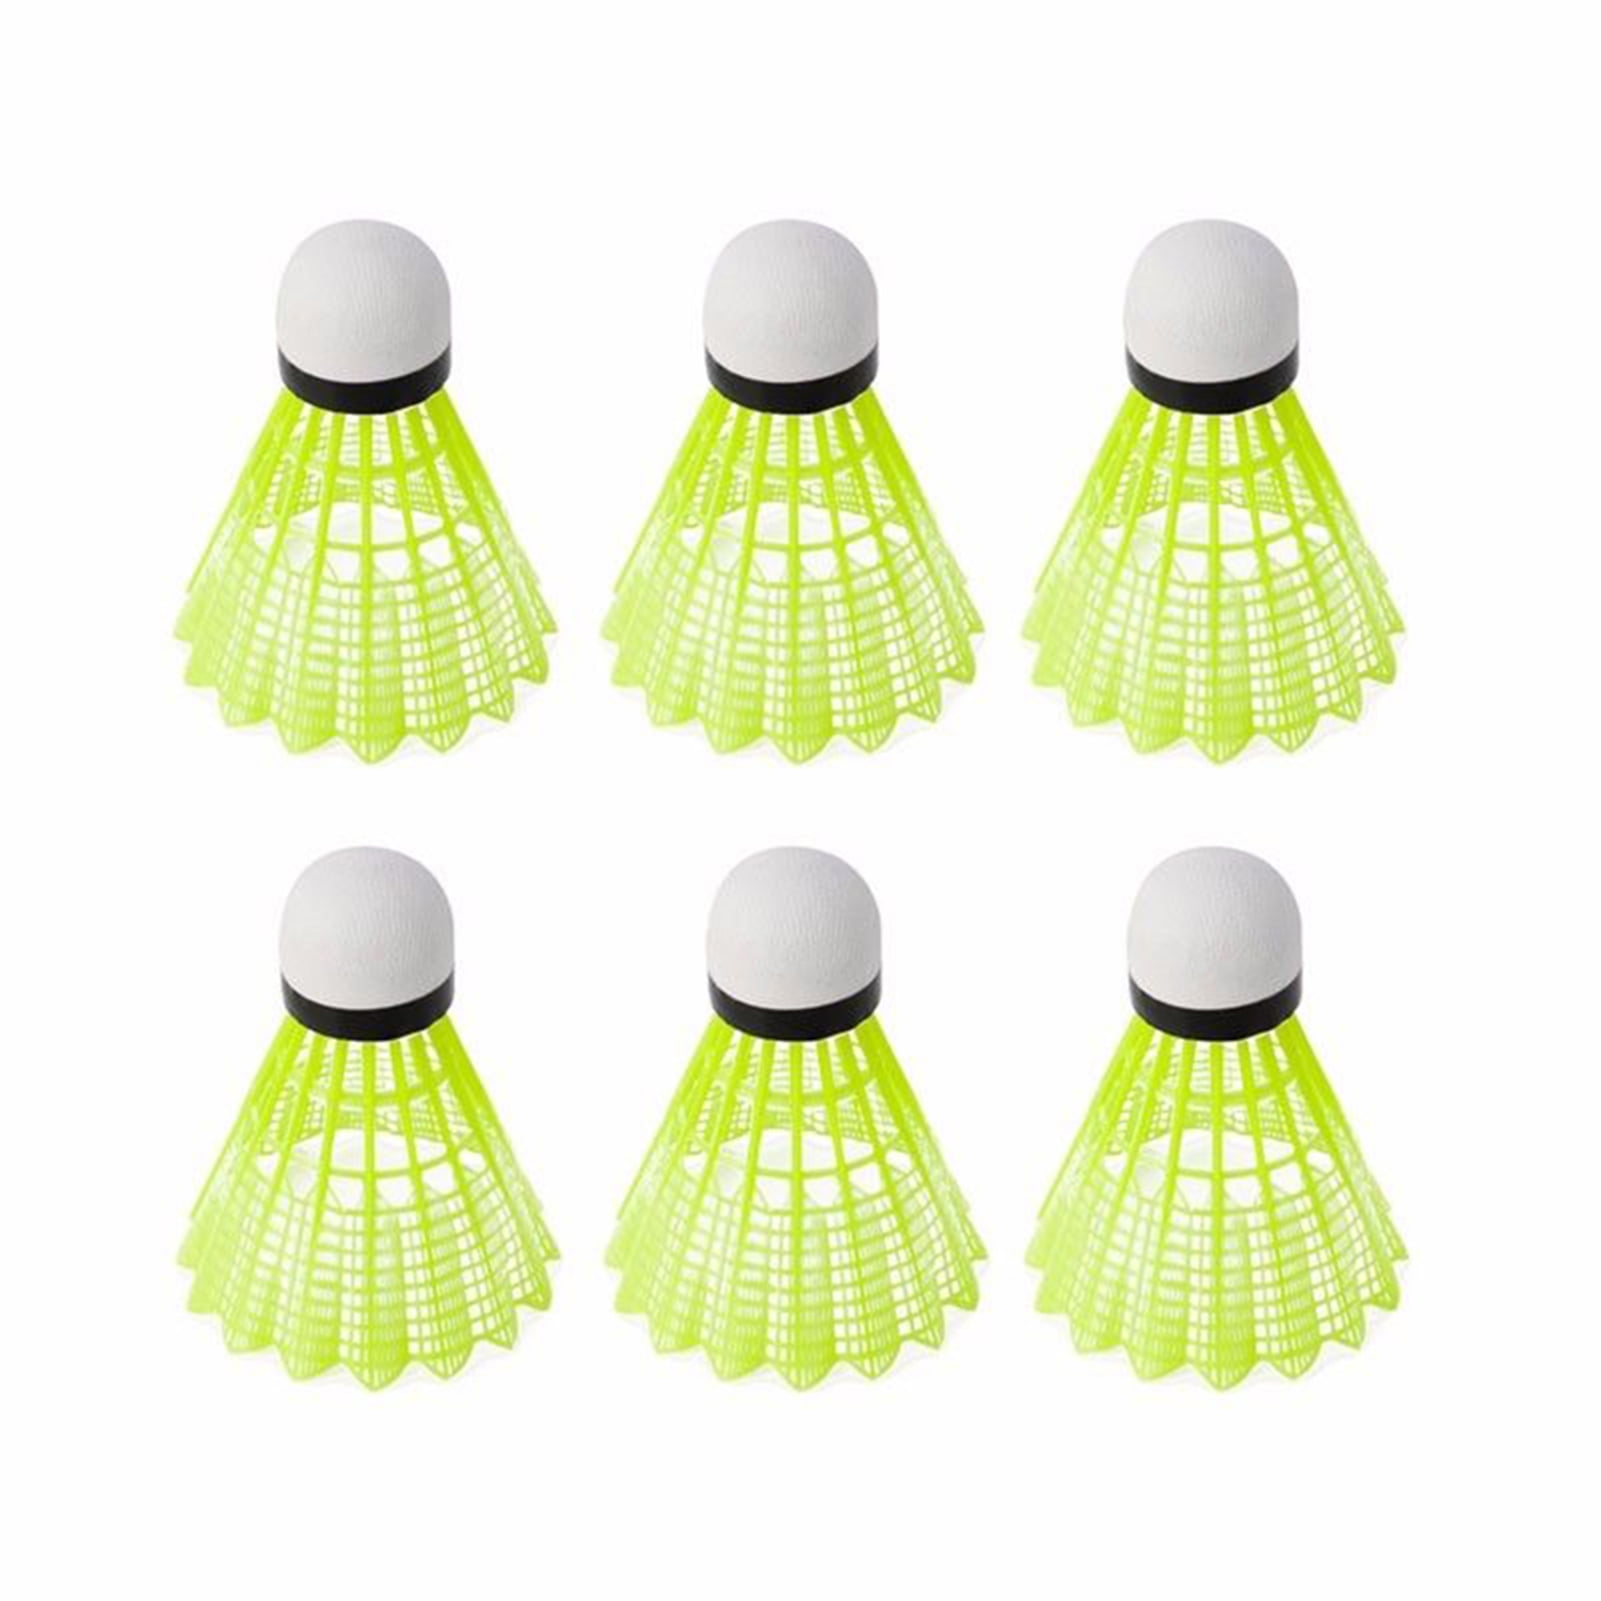 ActFu 6Pcs Feather Shuttlecocks Professional Flying Stability Durable Yellow Shuttlecock Sport Training Badminton Ball for Outdoor